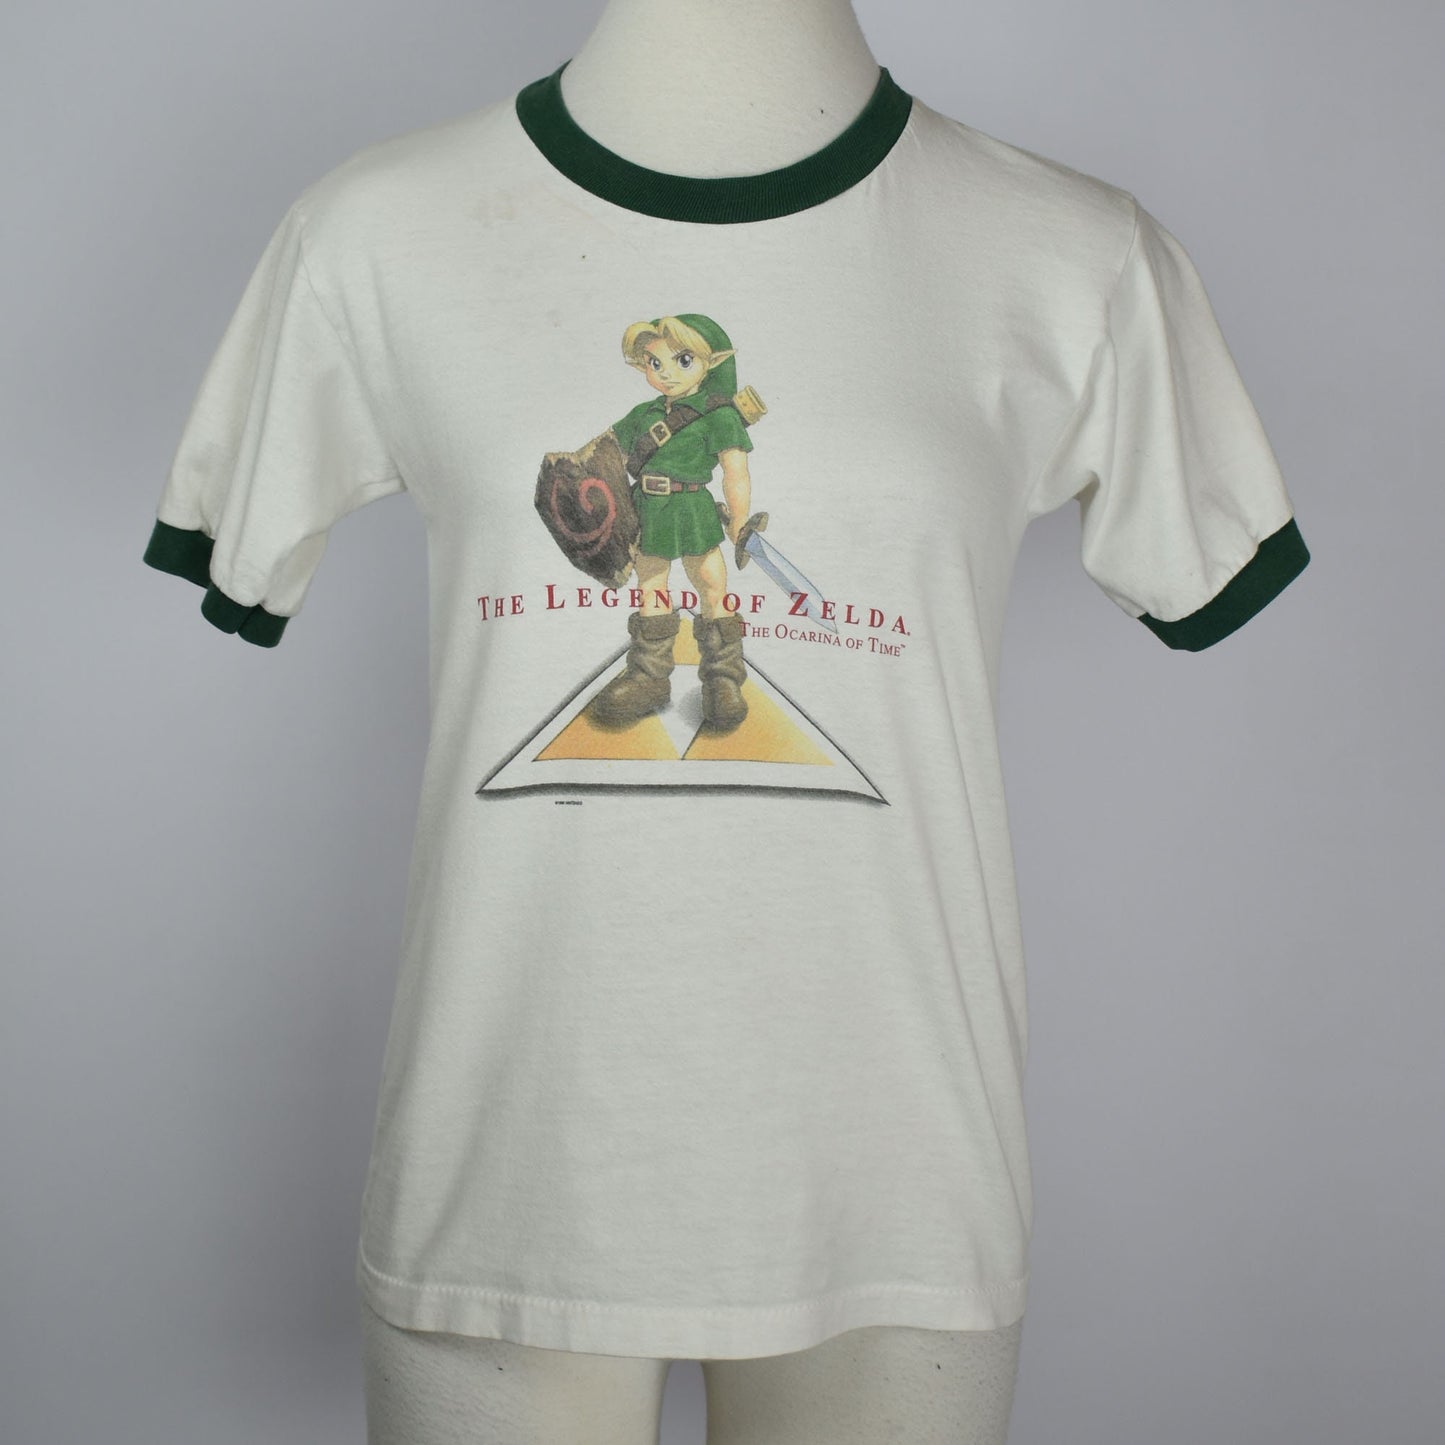 Vintage 90s The Legend of Zelda The Ocarina of Time T-shirt - Made in USA - Size L Youth Graphic Tee